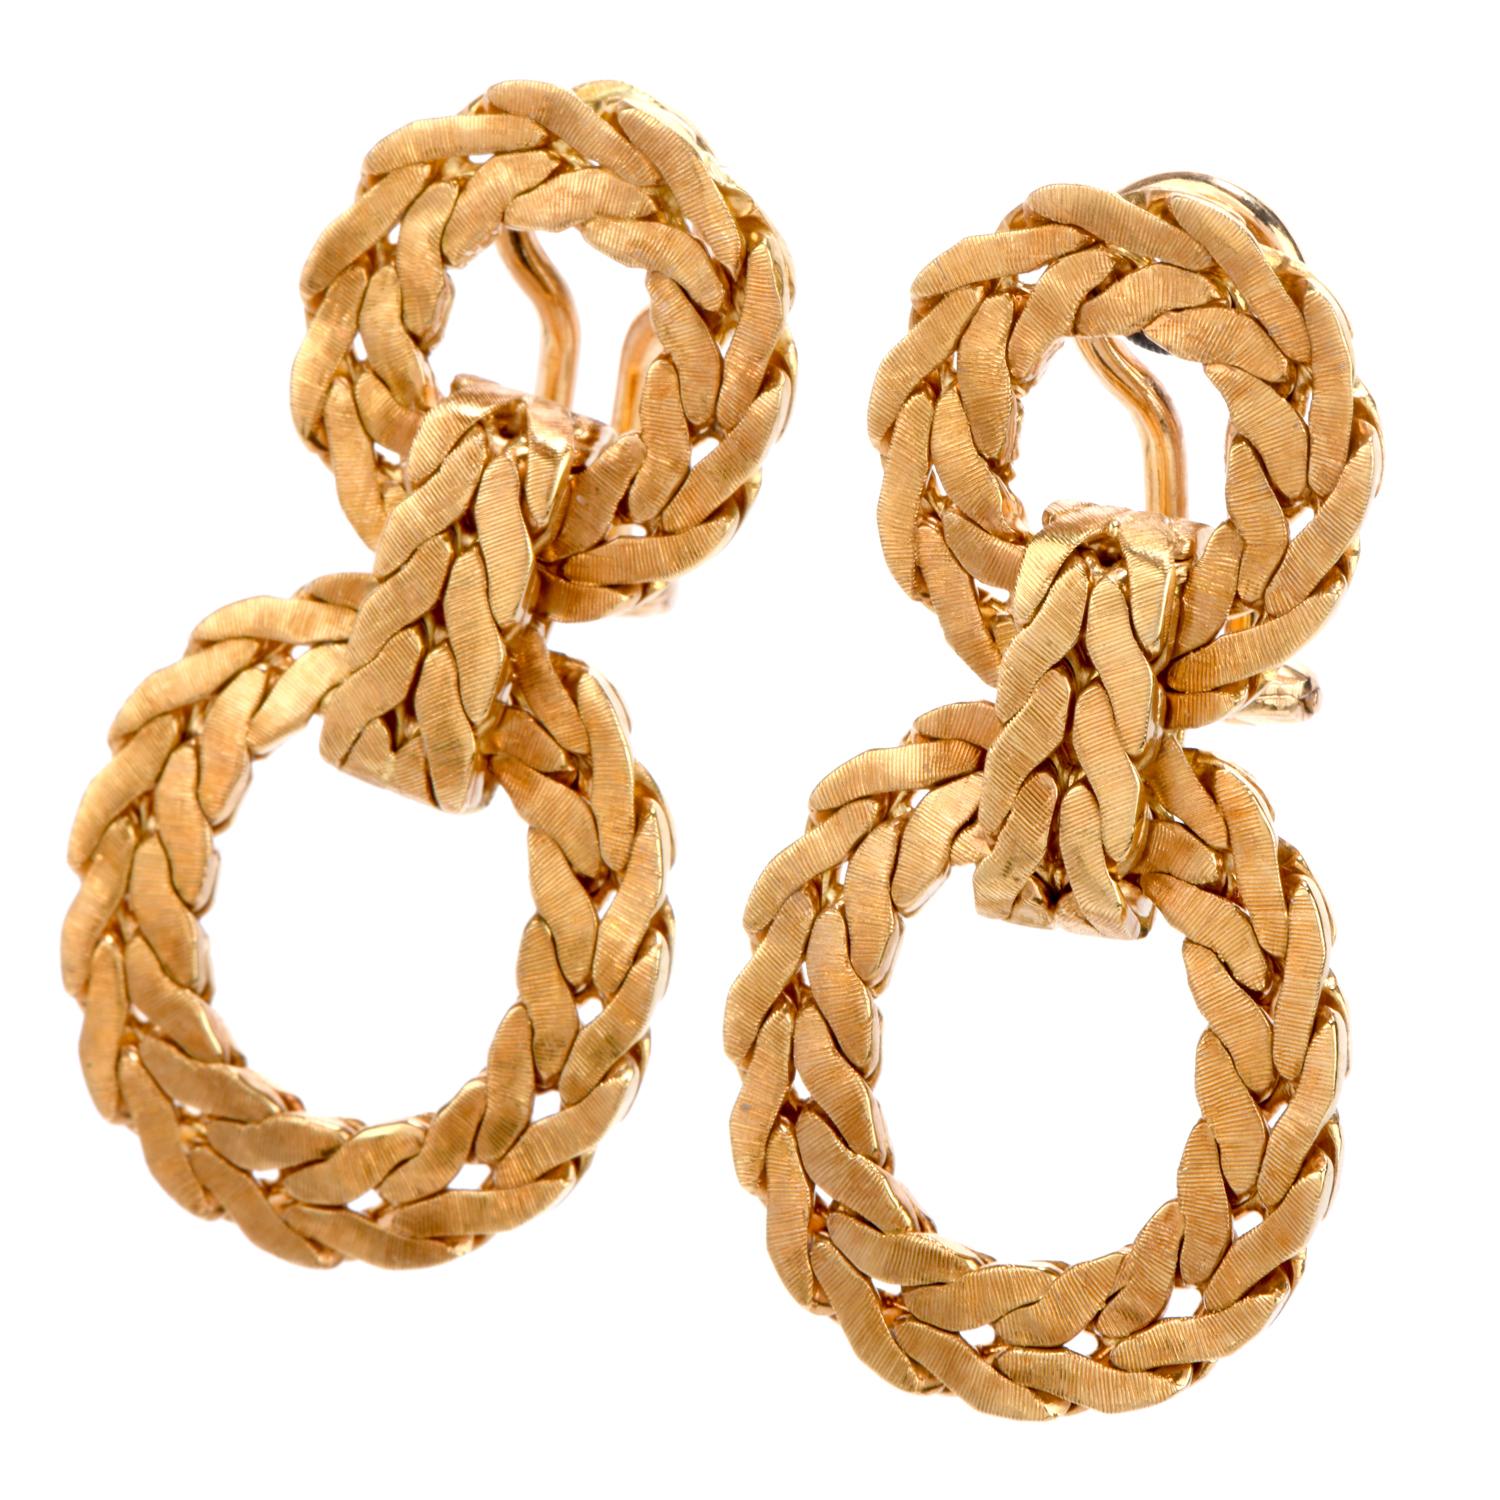 Decorate yourself with these romantic vintage 1950s Laurel Wreath Earrings by Buccellati.  Cesar wore a laurel wreath to signify his power, success and honor.  Door Knocker style earrings were also worn by popular 1950s actresses such as Marilyn